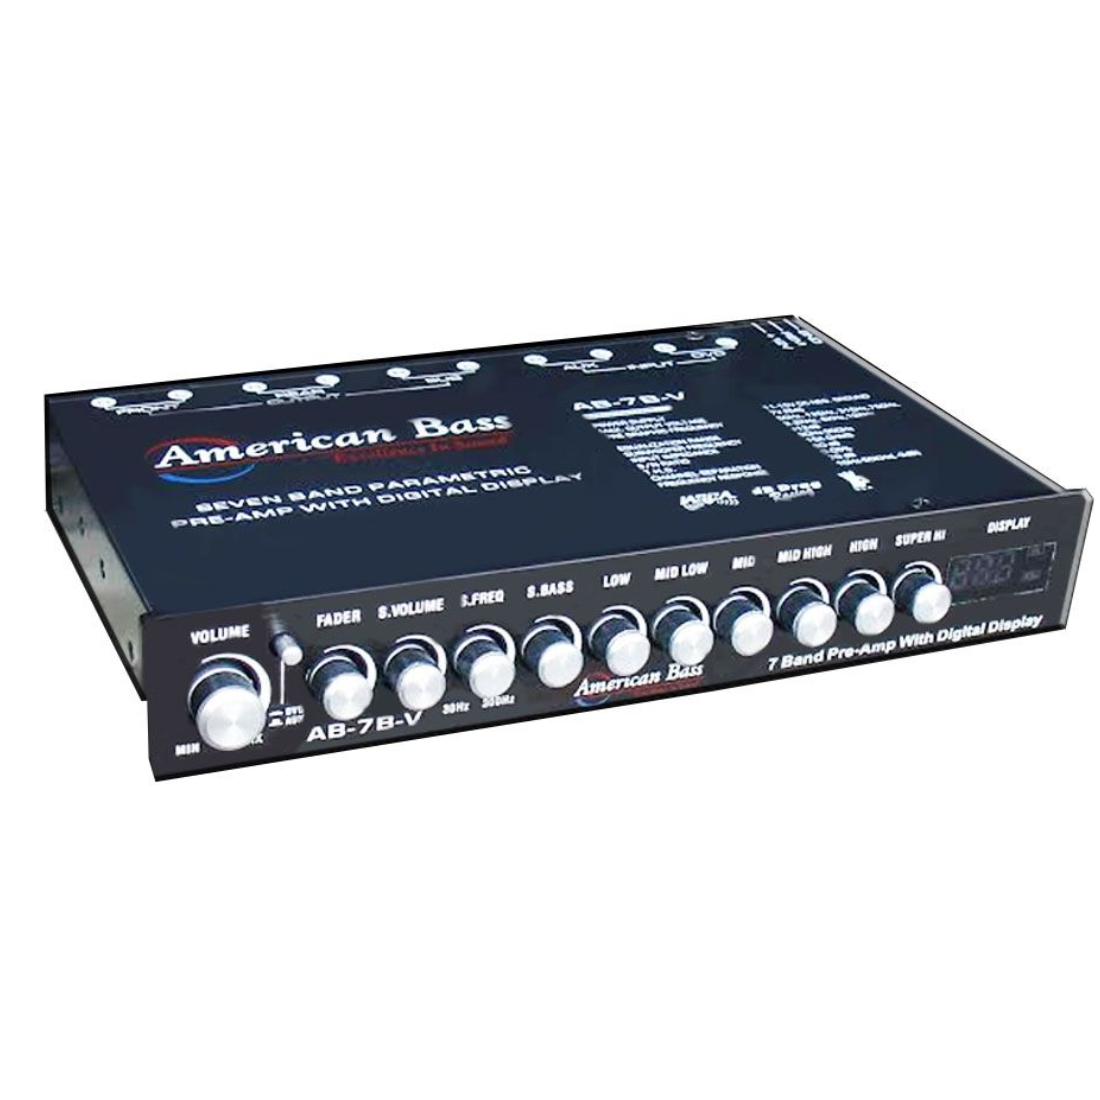 American Bass ABV-7B 7-Band Parametric Equalizer Pre-Amp with Digital Display